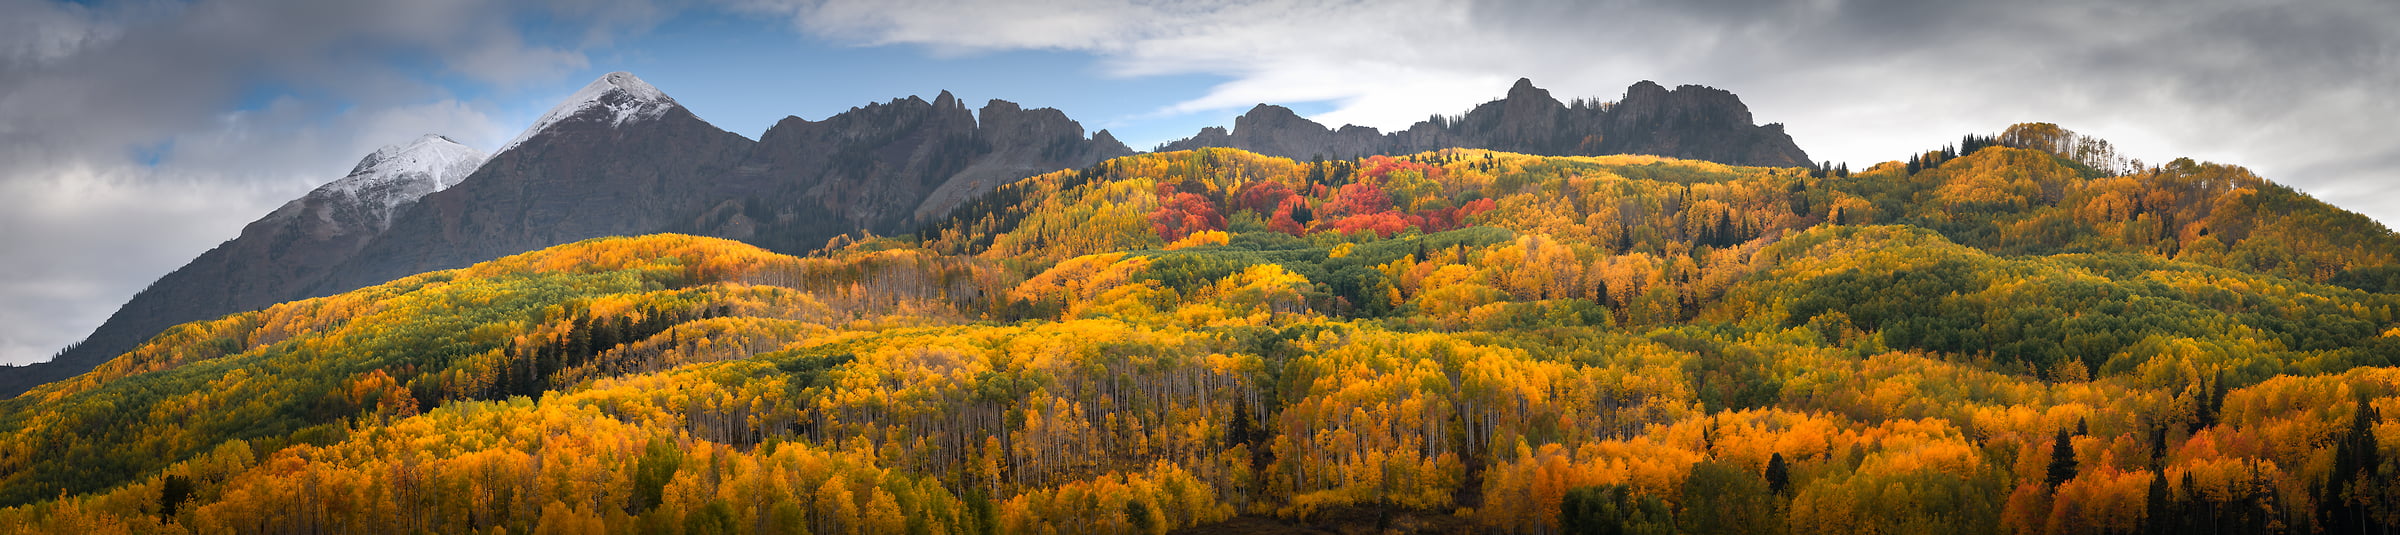 469 megapixels! A very high resolution, wallpaper photo of a Colorado landscape with autumn trees in the foreground and mountains in the background; photograph created by Jeff Lewis in Crested Butte, Colorado.